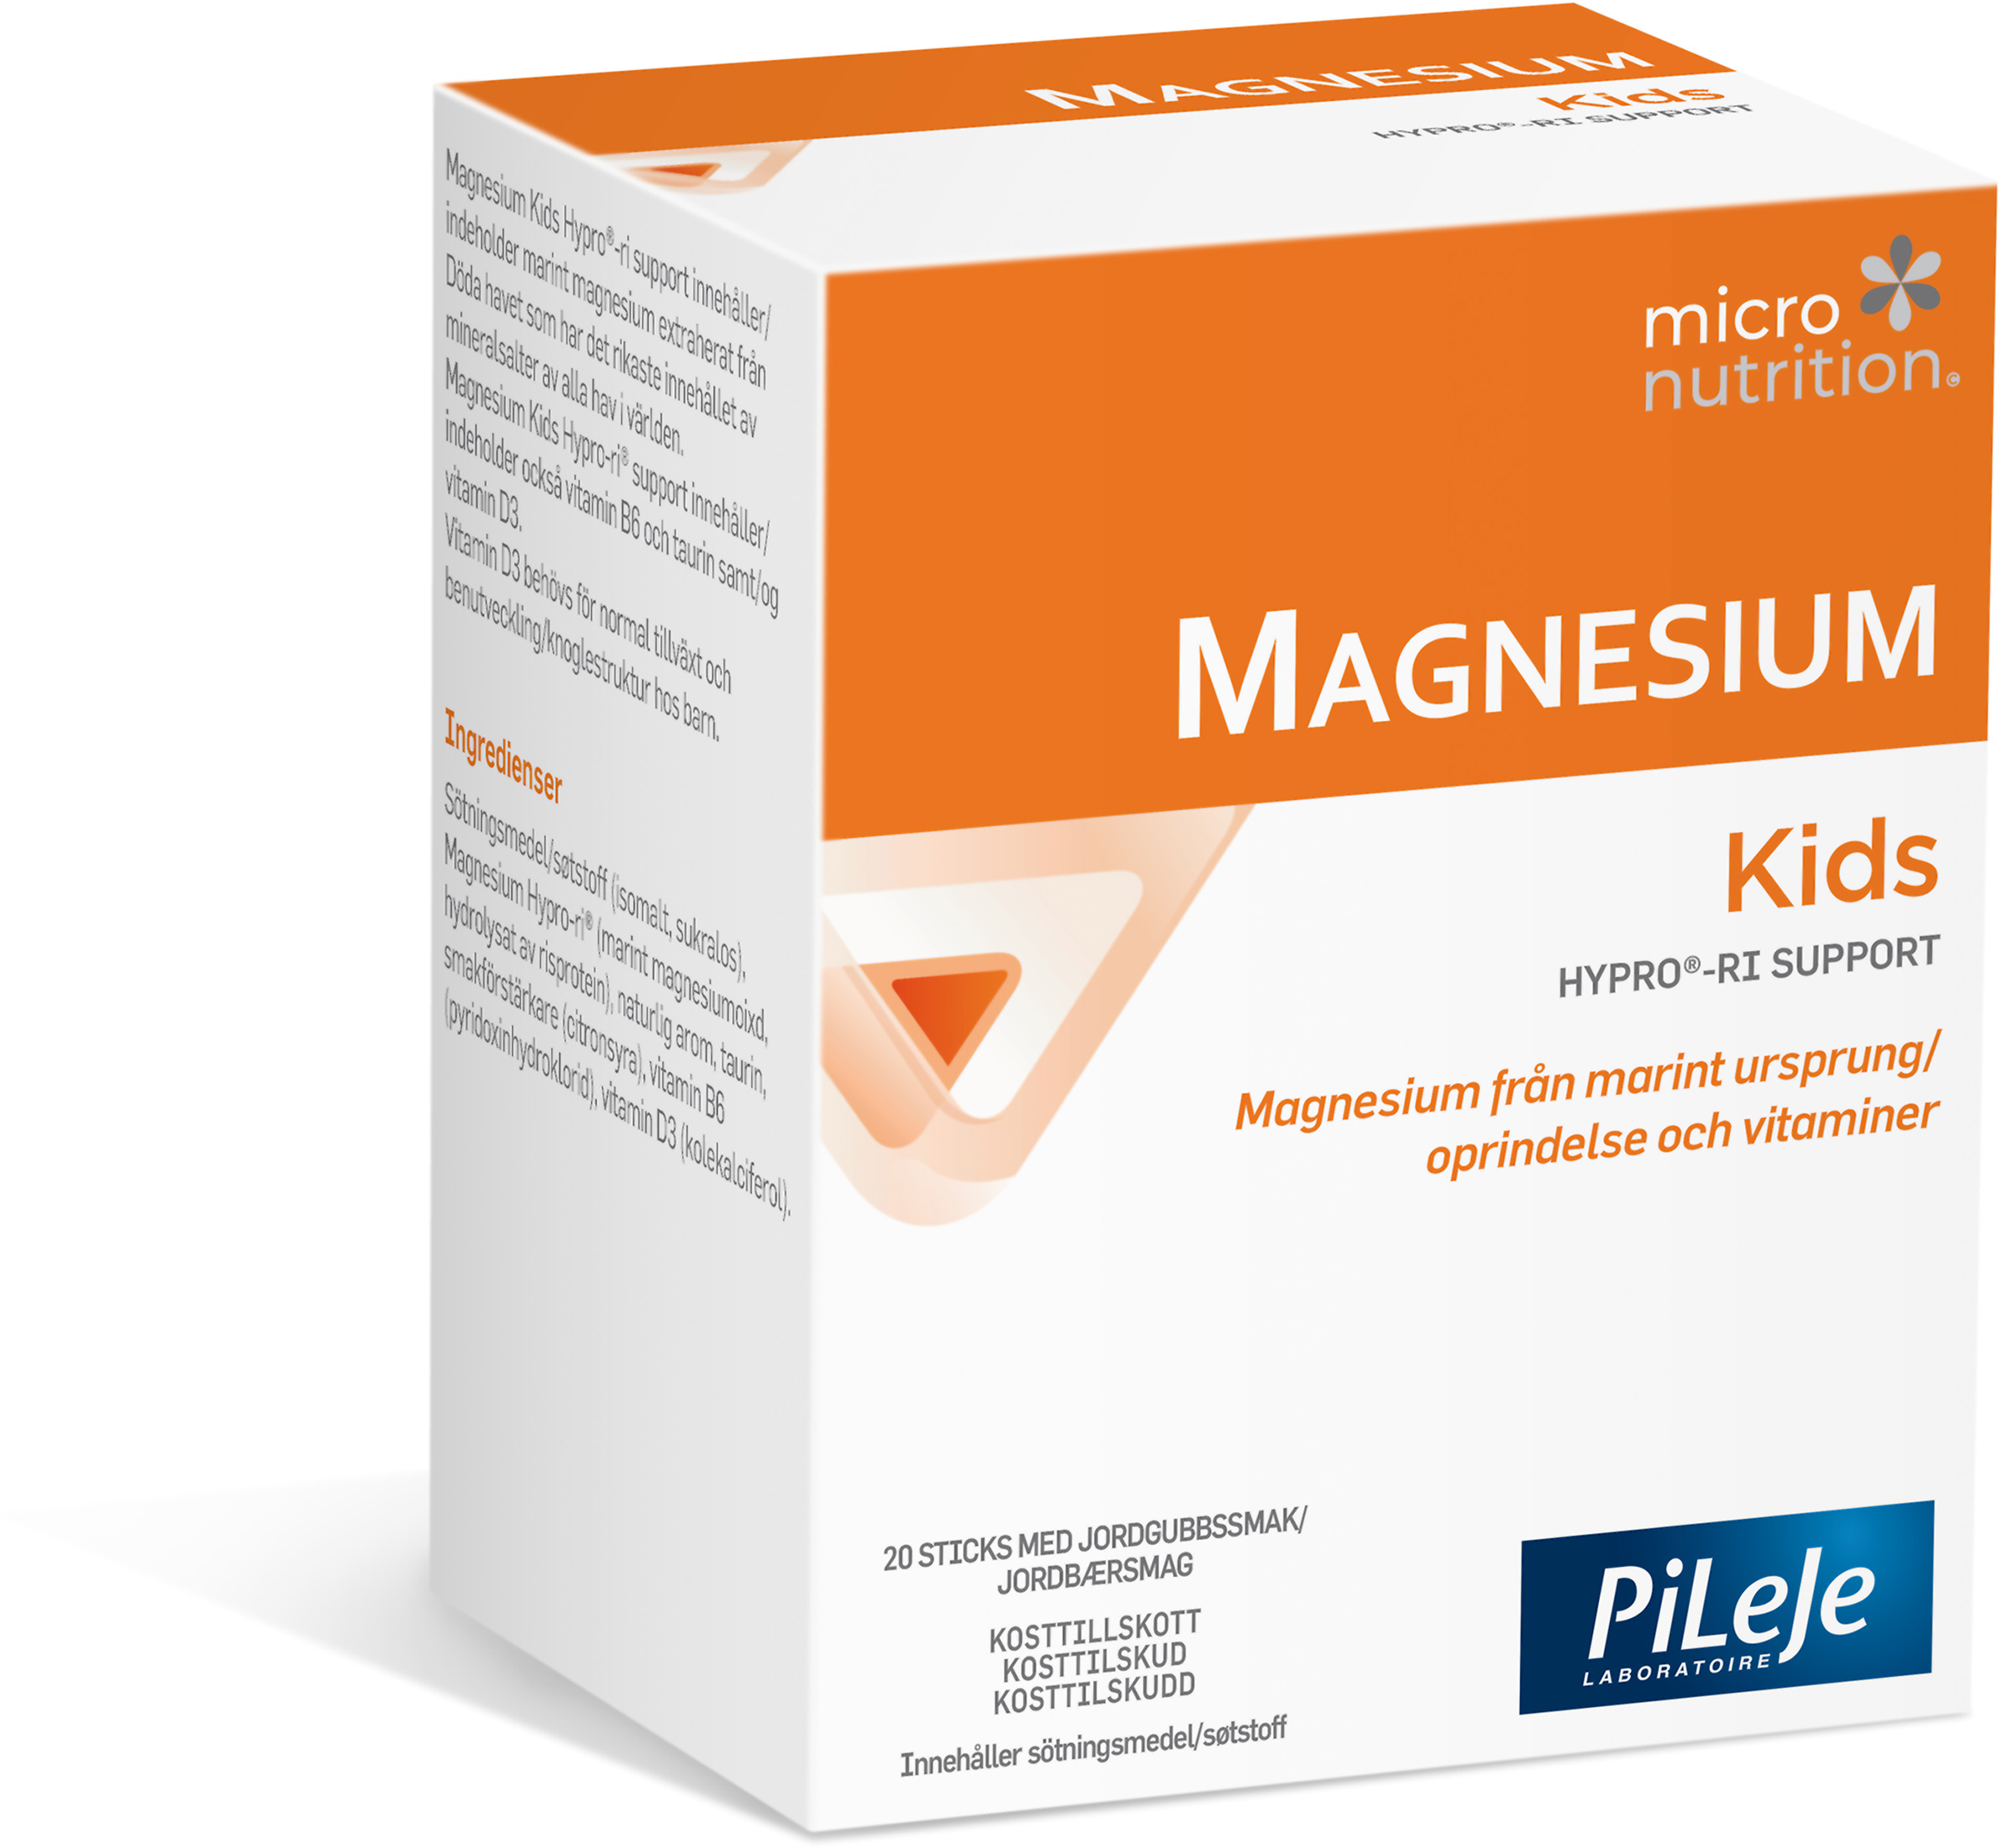 Micronutrition Magnesium Kids Hypro-ri support 20 st